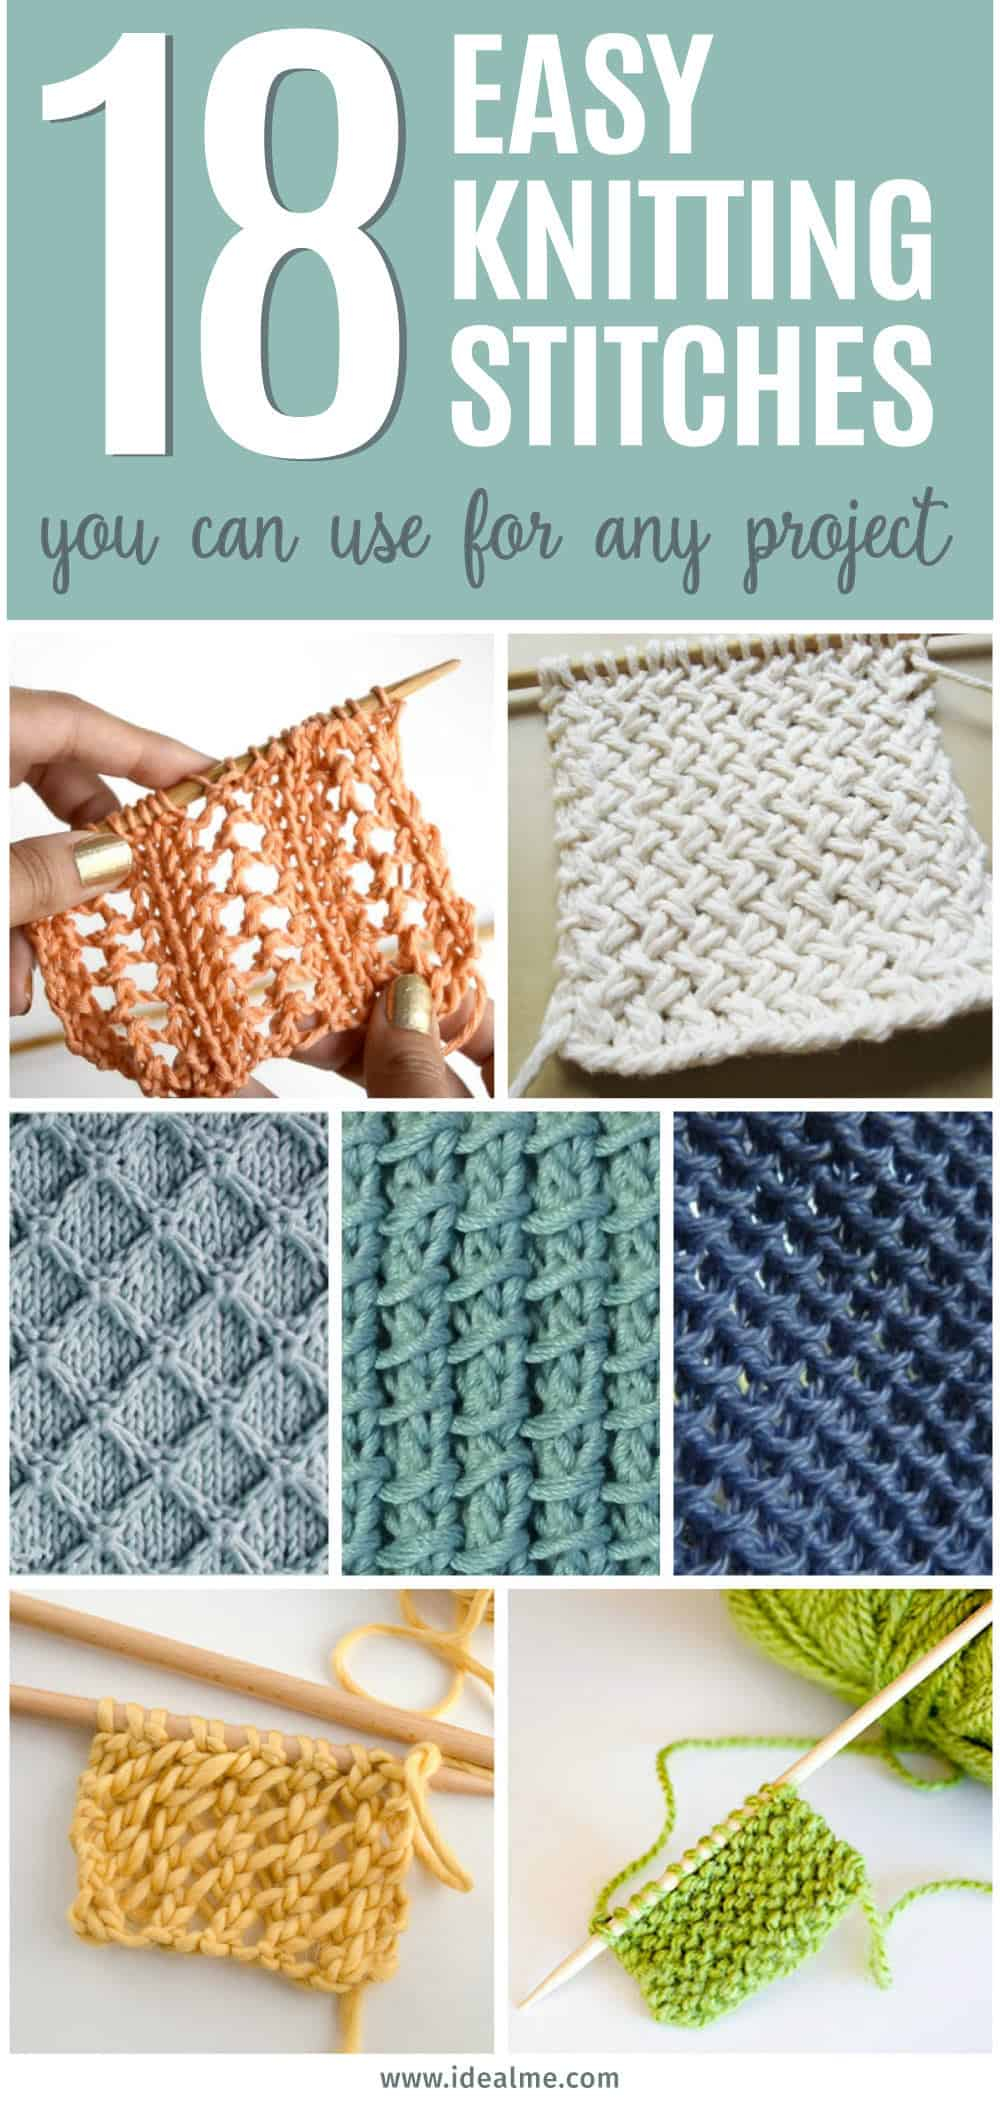 Knitting Patterns For Tablecloths Simple Knitting Patterns For Tablecloths For Beggi